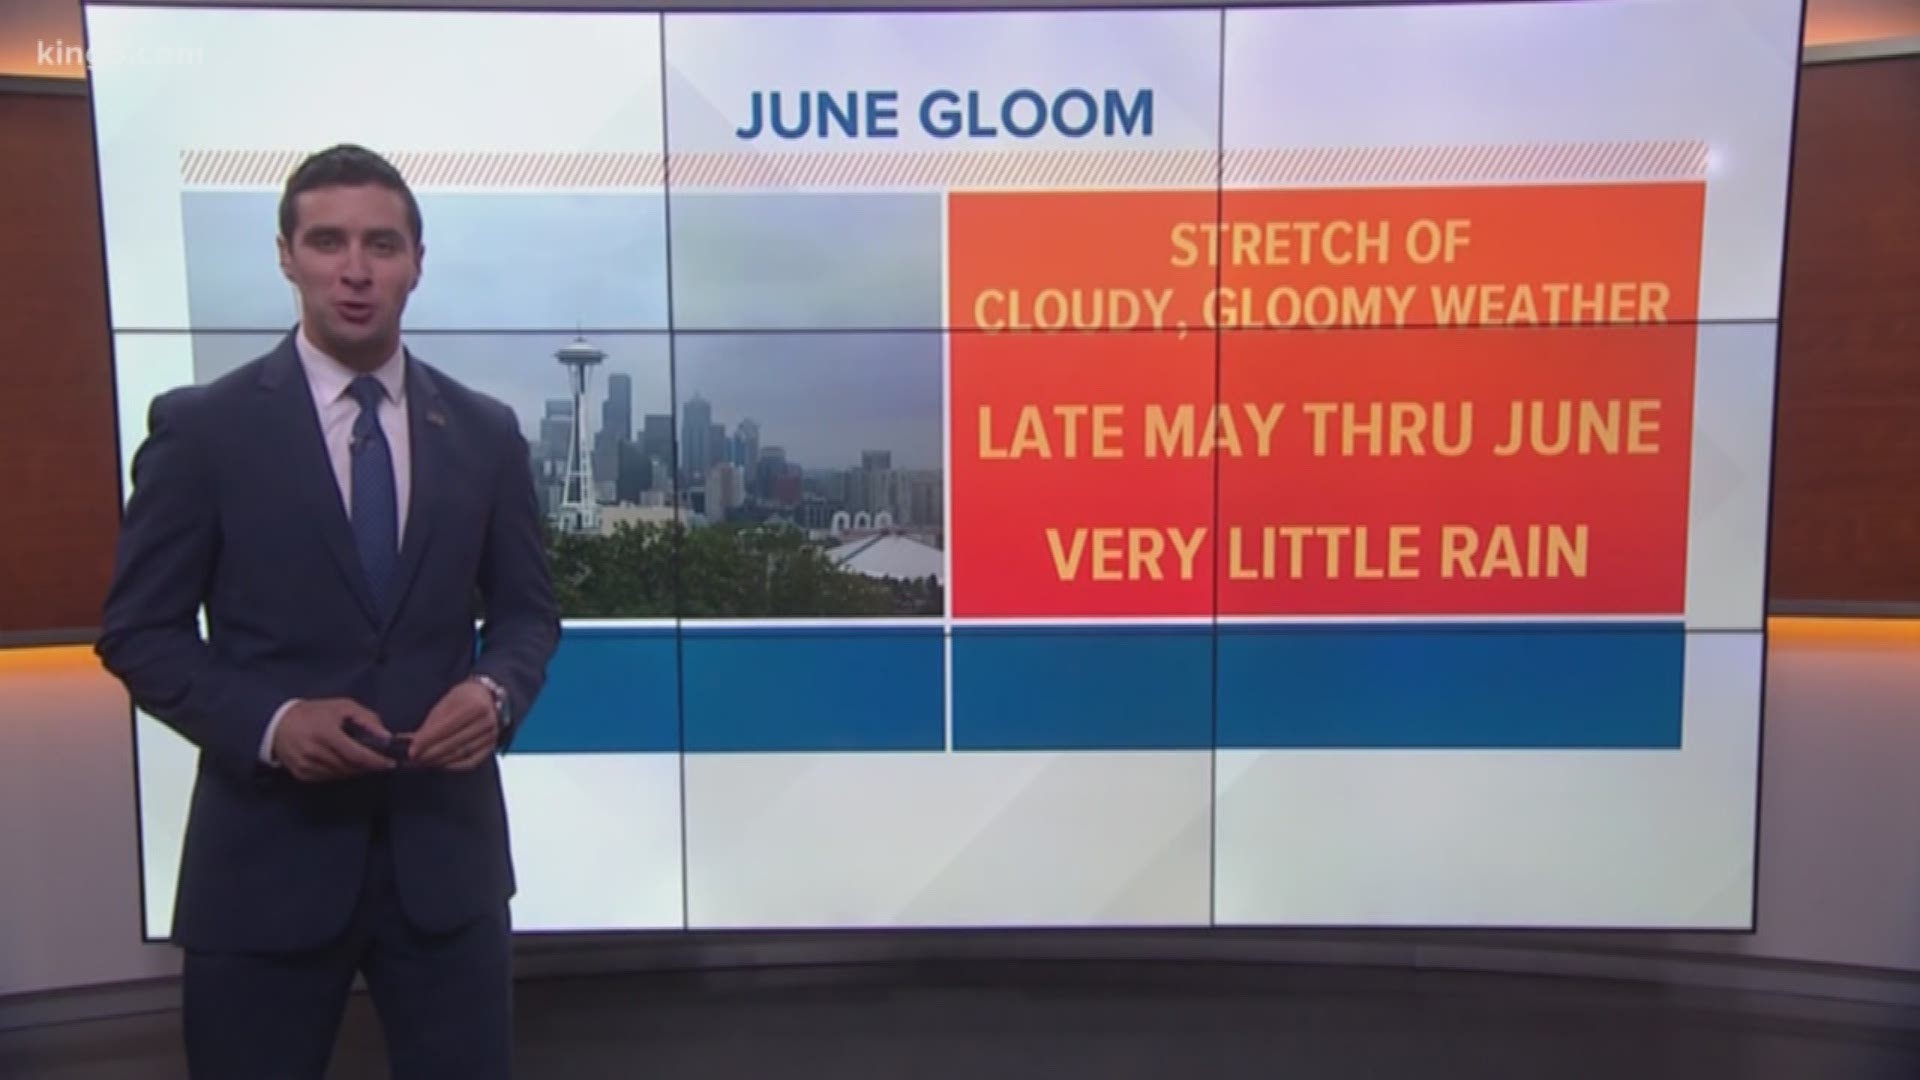 We've seen more clouds lately - which could be the start to June Gloom. Have you ever felt it? For more on what June gloom is, we turn to KING 5 Meteorologist Ben Dery.